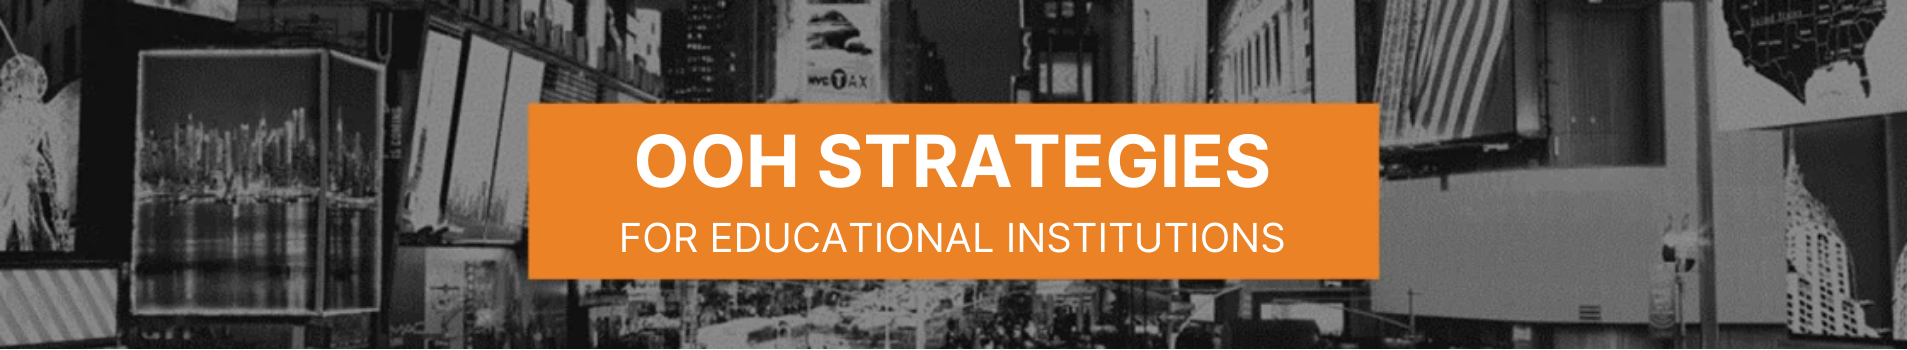 OOH STRATEGIES FOR EDUCATIONAL INSTITUTIONS